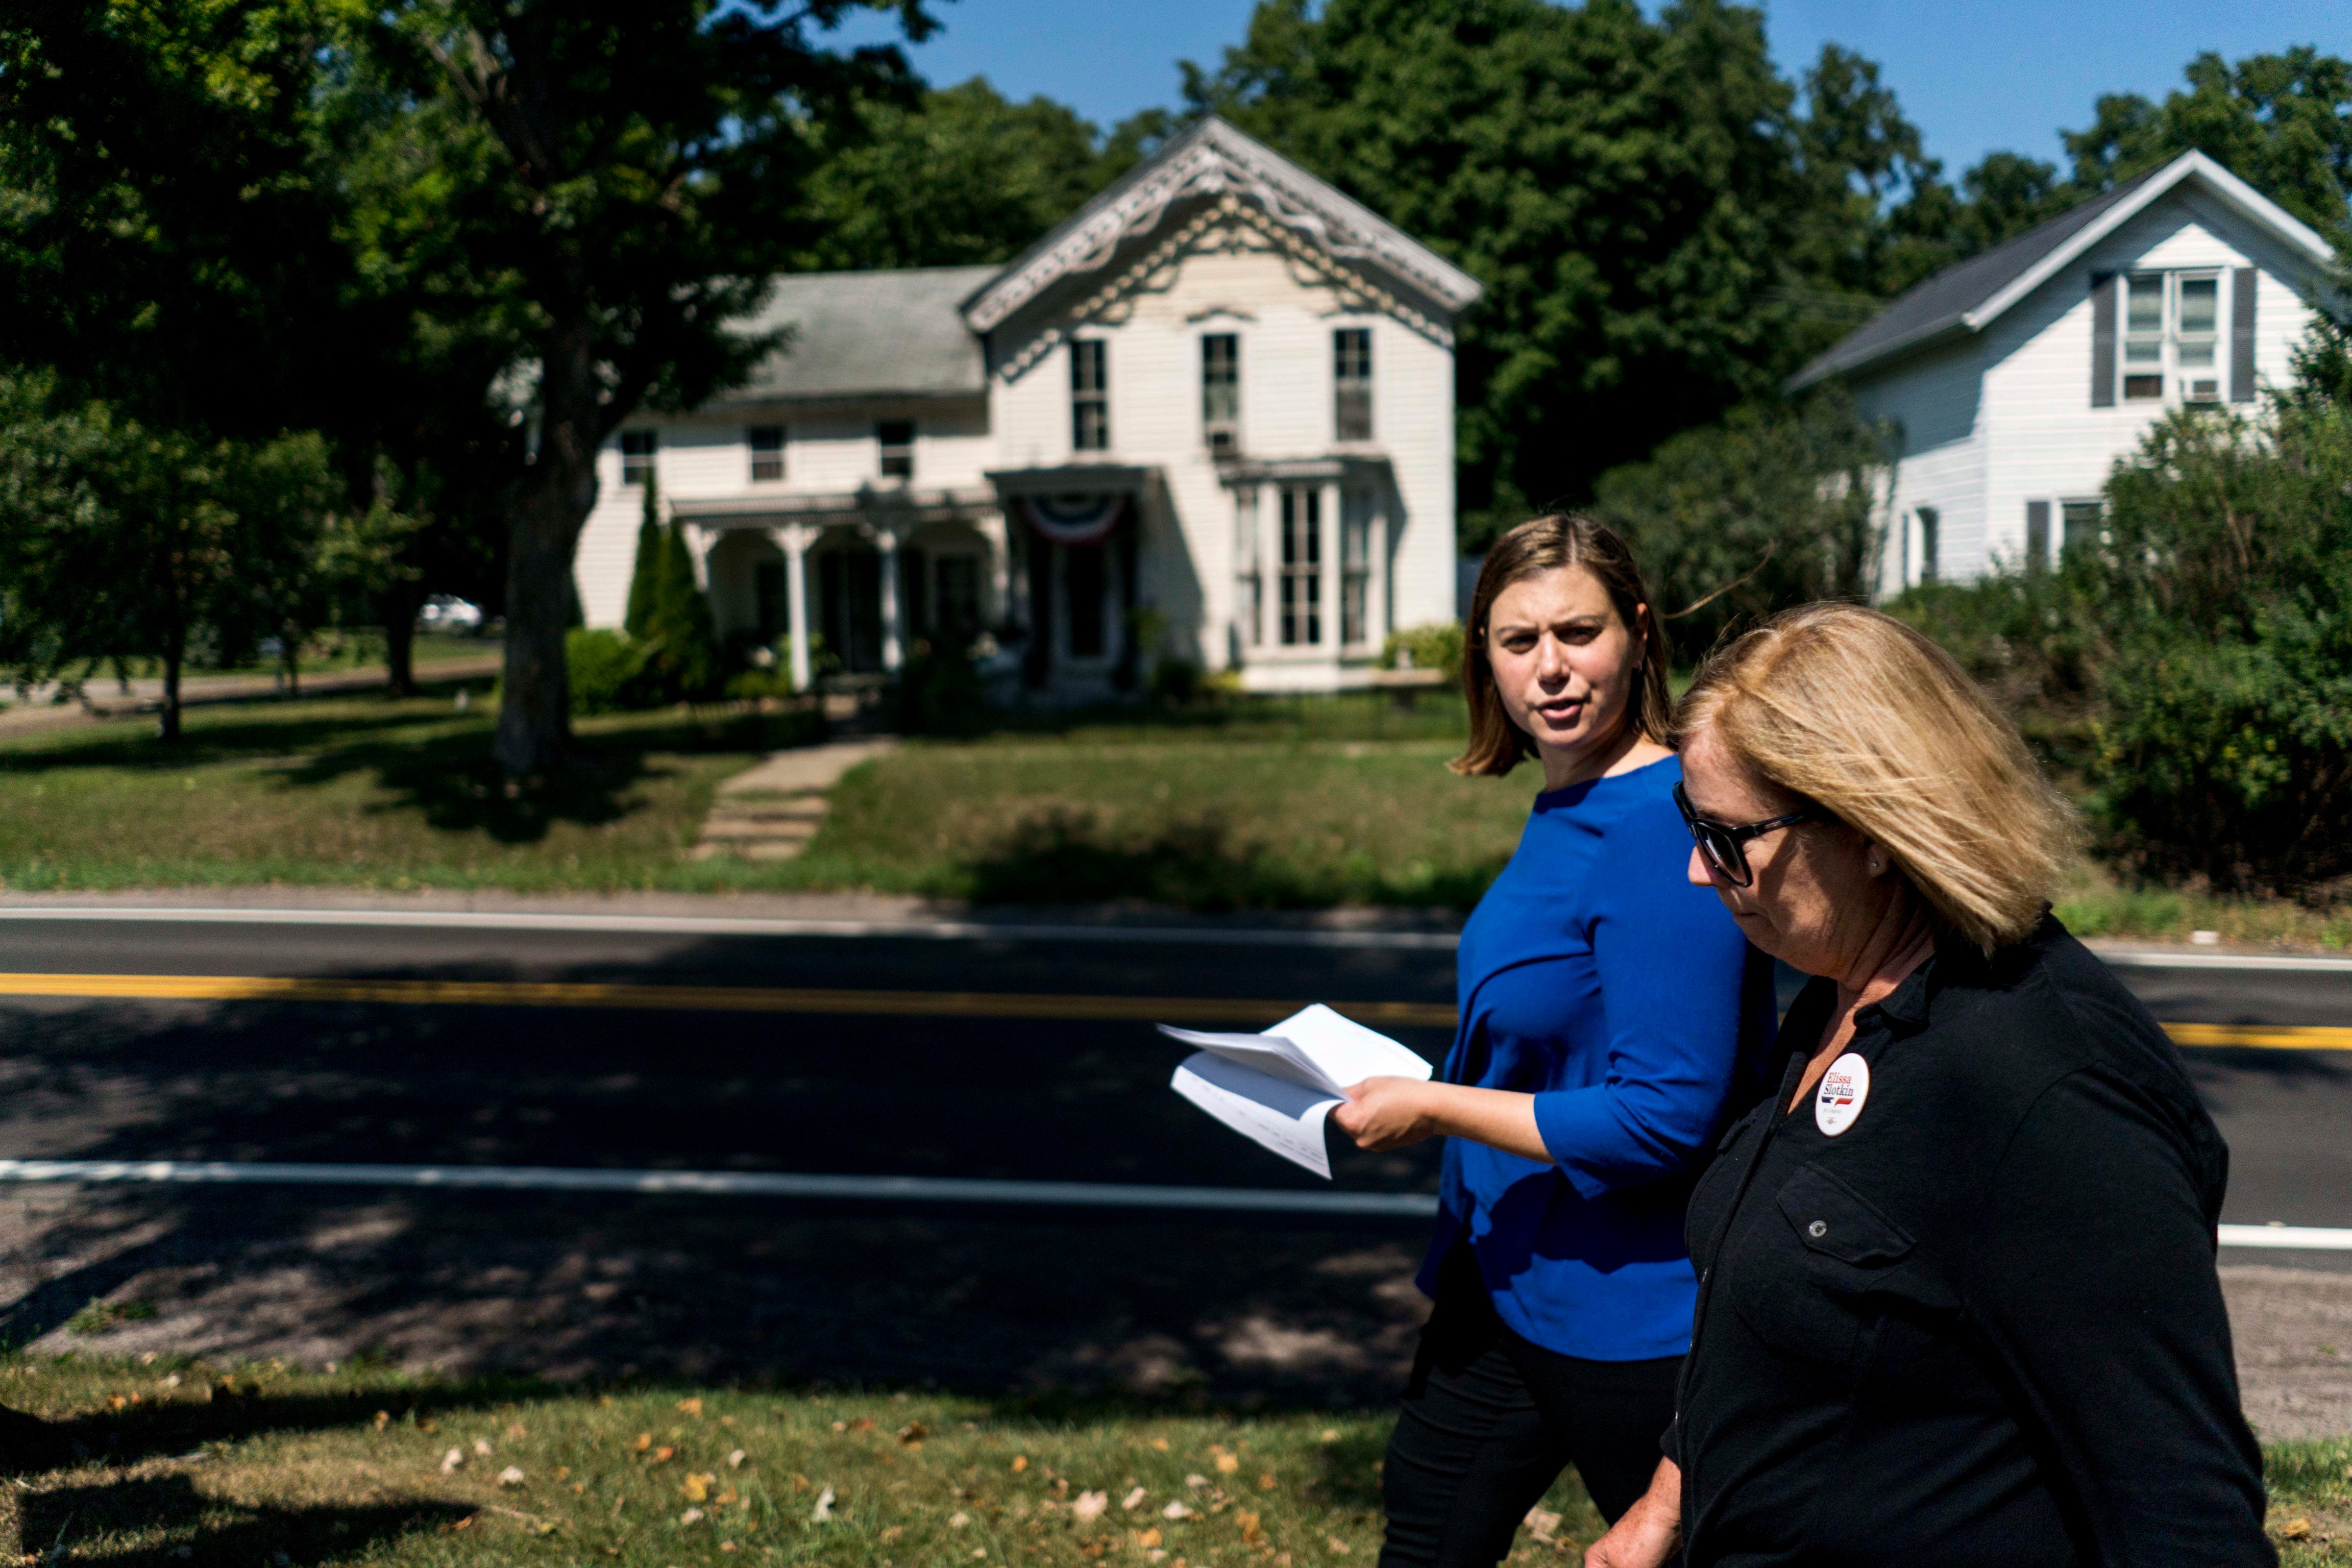 HOLLY, MICHIGAN - Elissa Slotkin, left,  Democratic candidate seeking election to the U.S. House to represent Michigan District 8, canvasses door to door with campaign volunteer Karen More near Holly, Michigan. (Photo by Melina Mara/The Washington Post --Getty Images) (The Washington Post&mdash;The Washington Post/Getty Images)